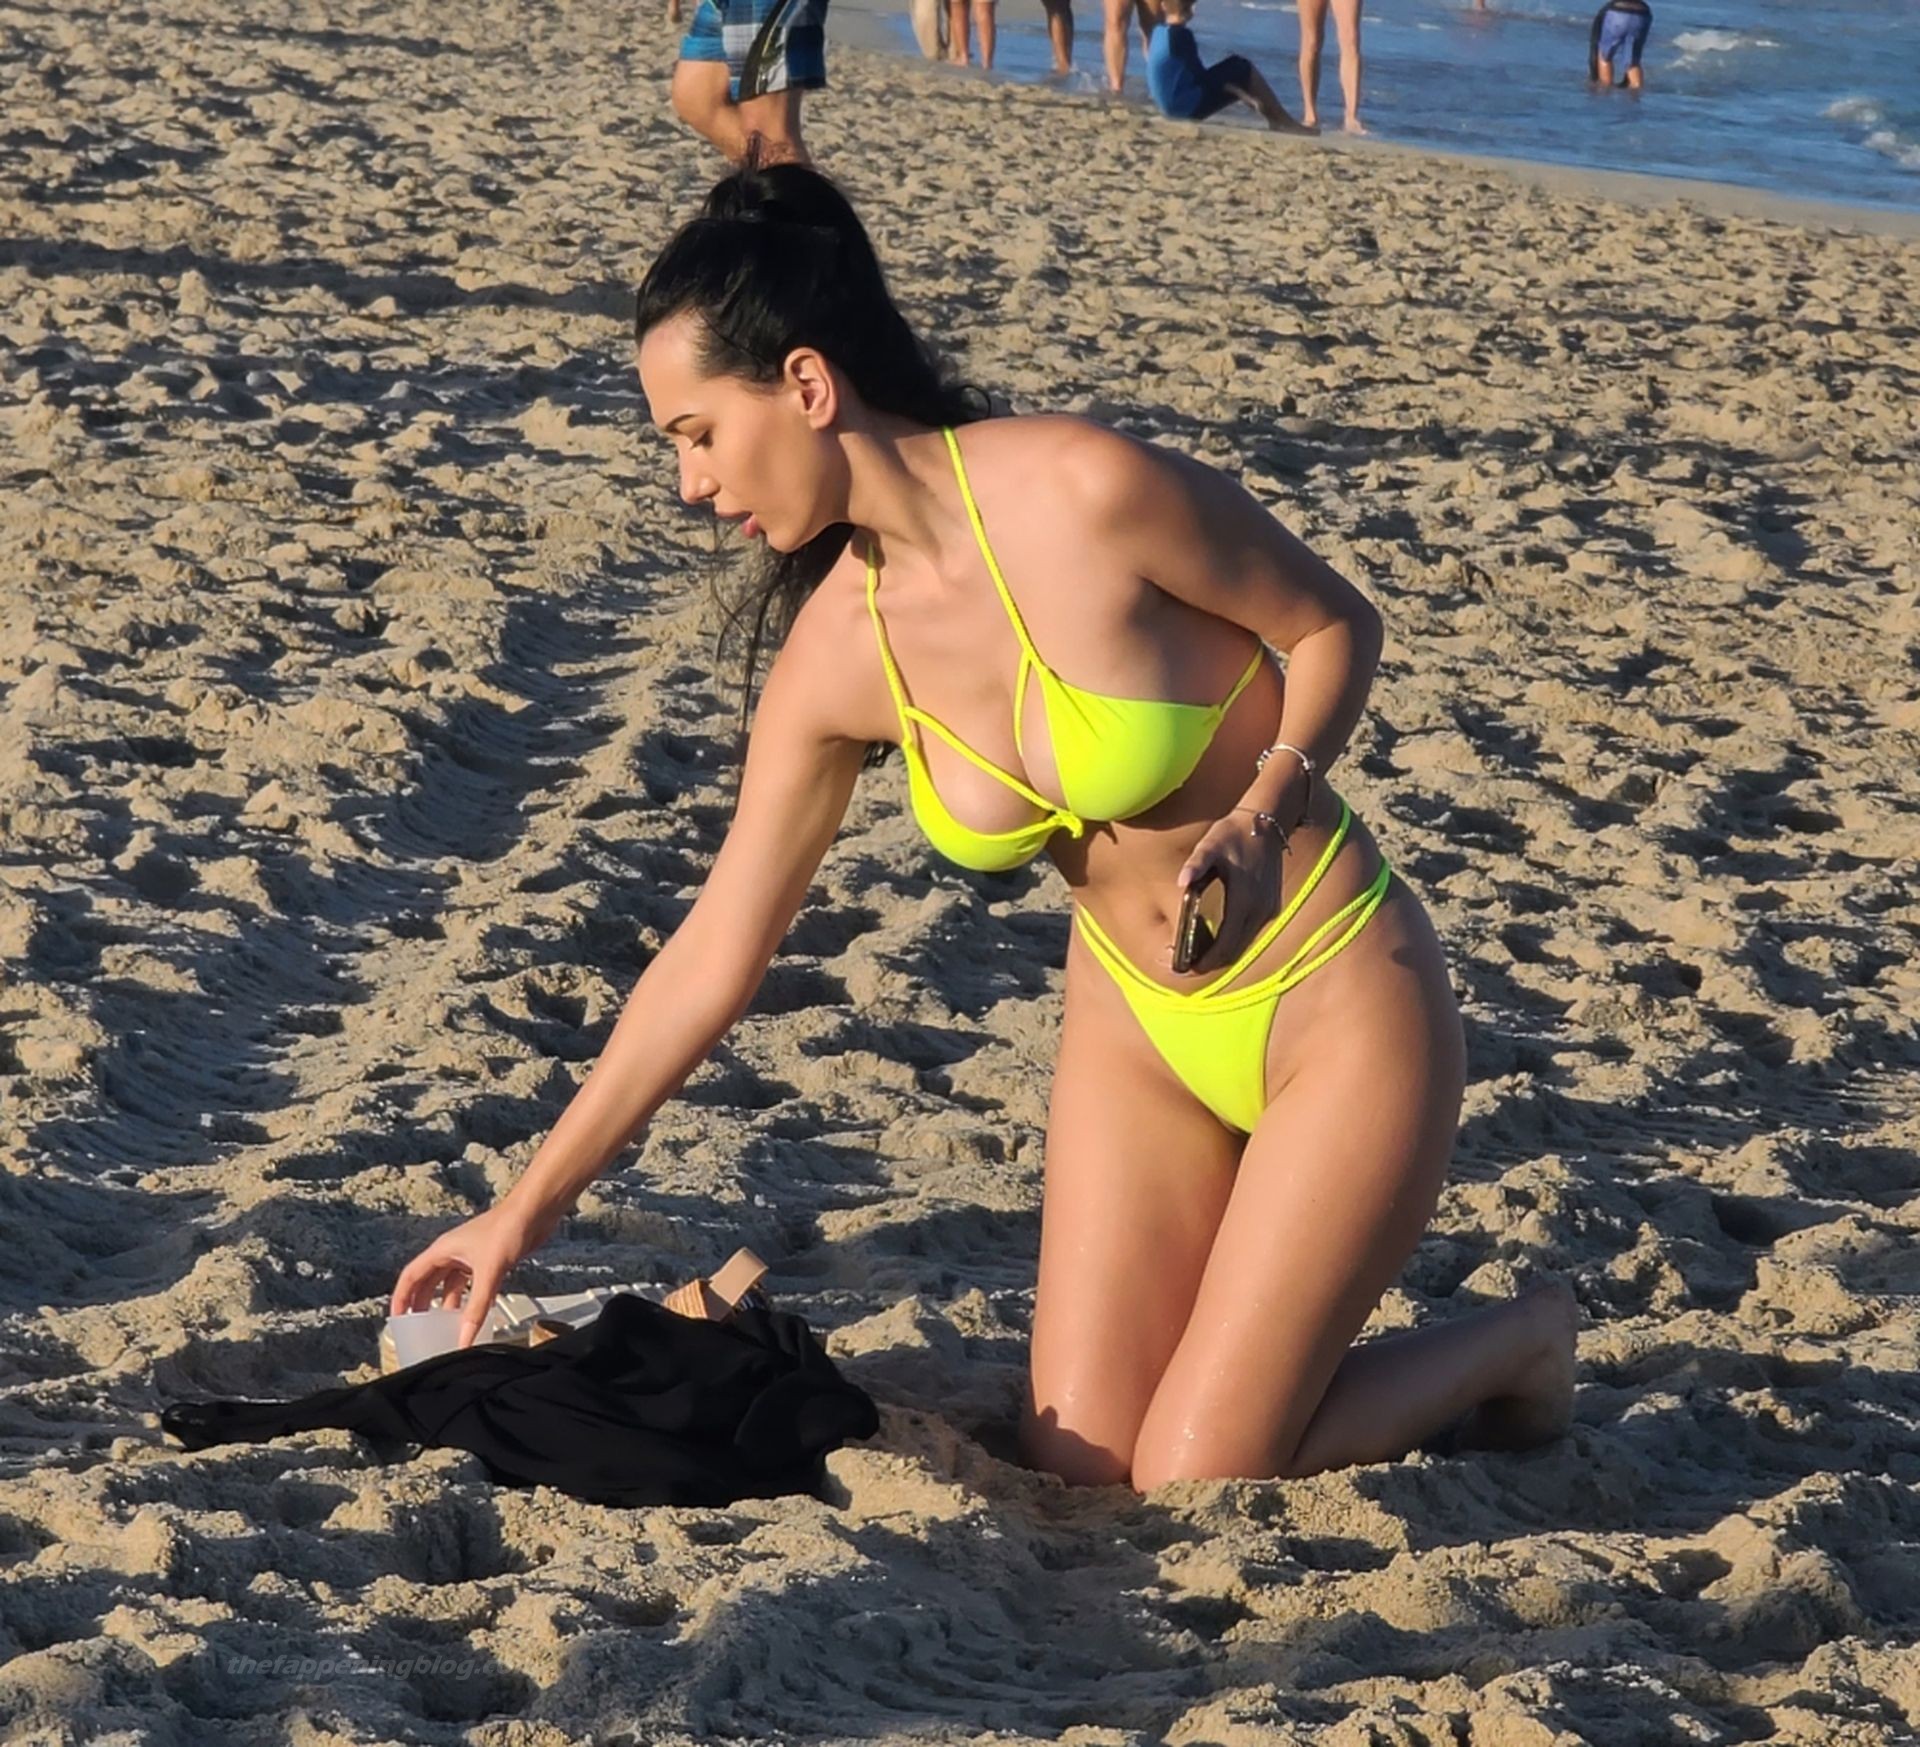 Iva Kovacevic Shows Off Her Curves on the Beach (37 Photos)